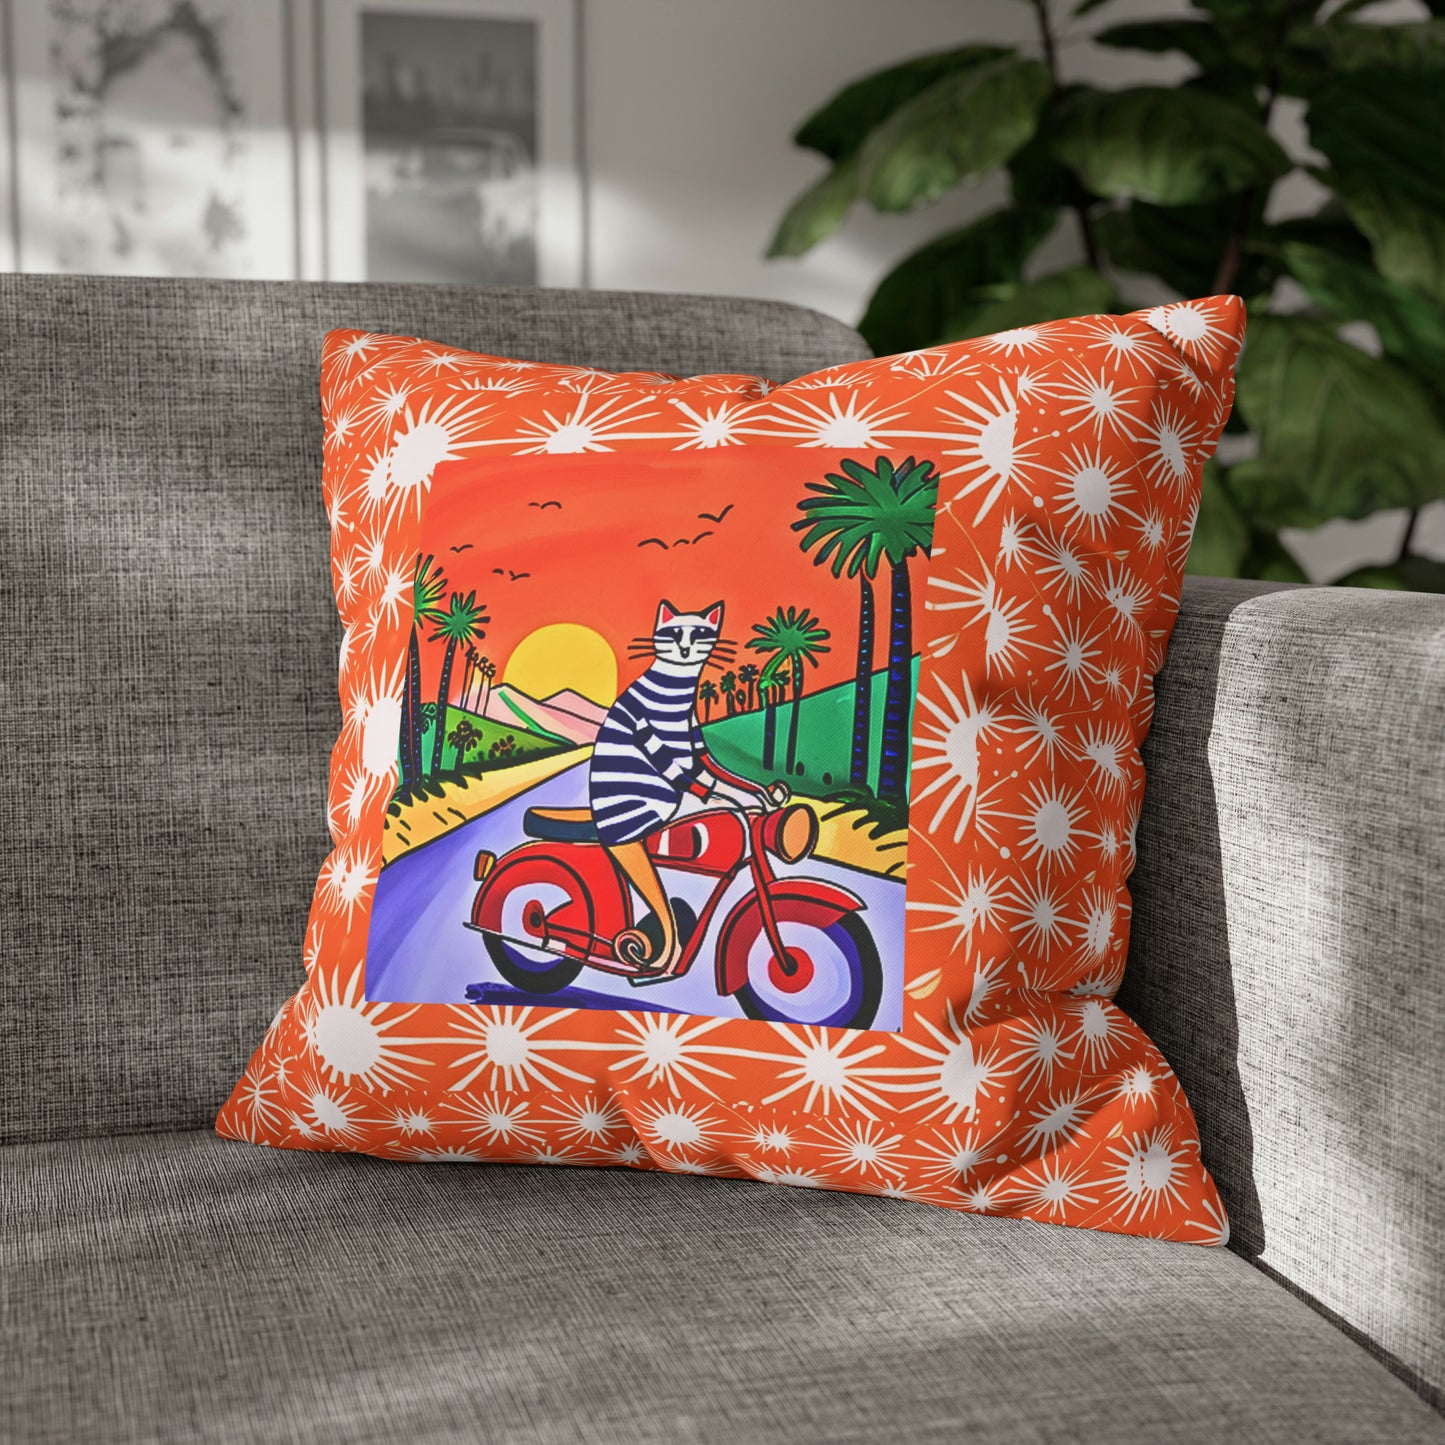 Cool Cat Moto Palm Springs Motorcycle Tour Midcentury Modern Children's Art Square Poly Canvas Pillow Cover